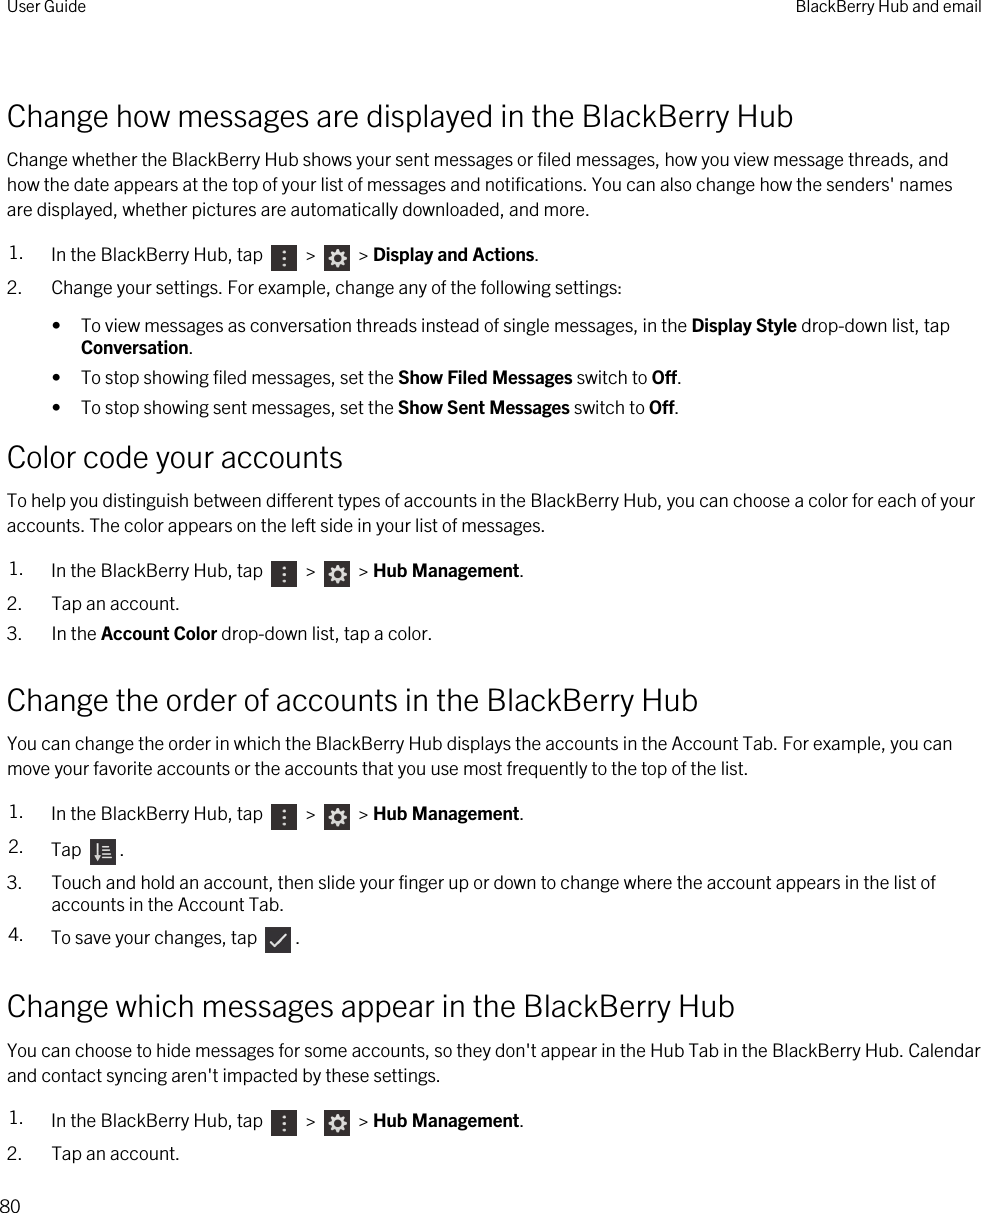 Change how messages are displayed in the BlackBerry HubChange whether the BlackBerry Hub shows your sent messages or filed messages, how you view message threads, and how the date appears at the top of your list of messages and notifications. You can also change how the senders&apos; names are displayed, whether pictures are automatically downloaded, and more.1. In the BlackBerry Hub, tap   &gt;   &gt; Display and Actions.2. Change your settings. For example, change any of the following settings:• To view messages as conversation threads instead of single messages, in the Display Style drop-down list, tap Conversation.• To stop showing filed messages, set the Show Filed Messages switch to Off.• To stop showing sent messages, set the Show Sent Messages switch to Off.Color code your accountsTo help you distinguish between different types of accounts in the BlackBerry Hub, you can choose a color for each of your accounts. The color appears on the left side in your list of messages.1. In the BlackBerry Hub, tap   &gt;   &gt; Hub Management.2. Tap an account.3. In the Account Color drop-down list, tap a color.Change the order of accounts in the BlackBerry HubYou can change the order in which the BlackBerry Hub displays the accounts in the Account Tab. For example, you can move your favorite accounts or the accounts that you use most frequently to the top of the list.1. In the BlackBerry Hub, tap   &gt;   &gt; Hub Management.2. Tap  .3. Touch and hold an account, then slide your finger up or down to change where the account appears in the list of accounts in the Account Tab.4. To save your changes, tap  .Change which messages appear in the BlackBerry HubYou can choose to hide messages for some accounts, so they don&apos;t appear in the Hub Tab in the BlackBerry Hub. Calendar and contact syncing aren&apos;t impacted by these settings.1. In the BlackBerry Hub, tap   &gt;   &gt; Hub Management.2. Tap an account.User Guide BlackBerry Hub and email80